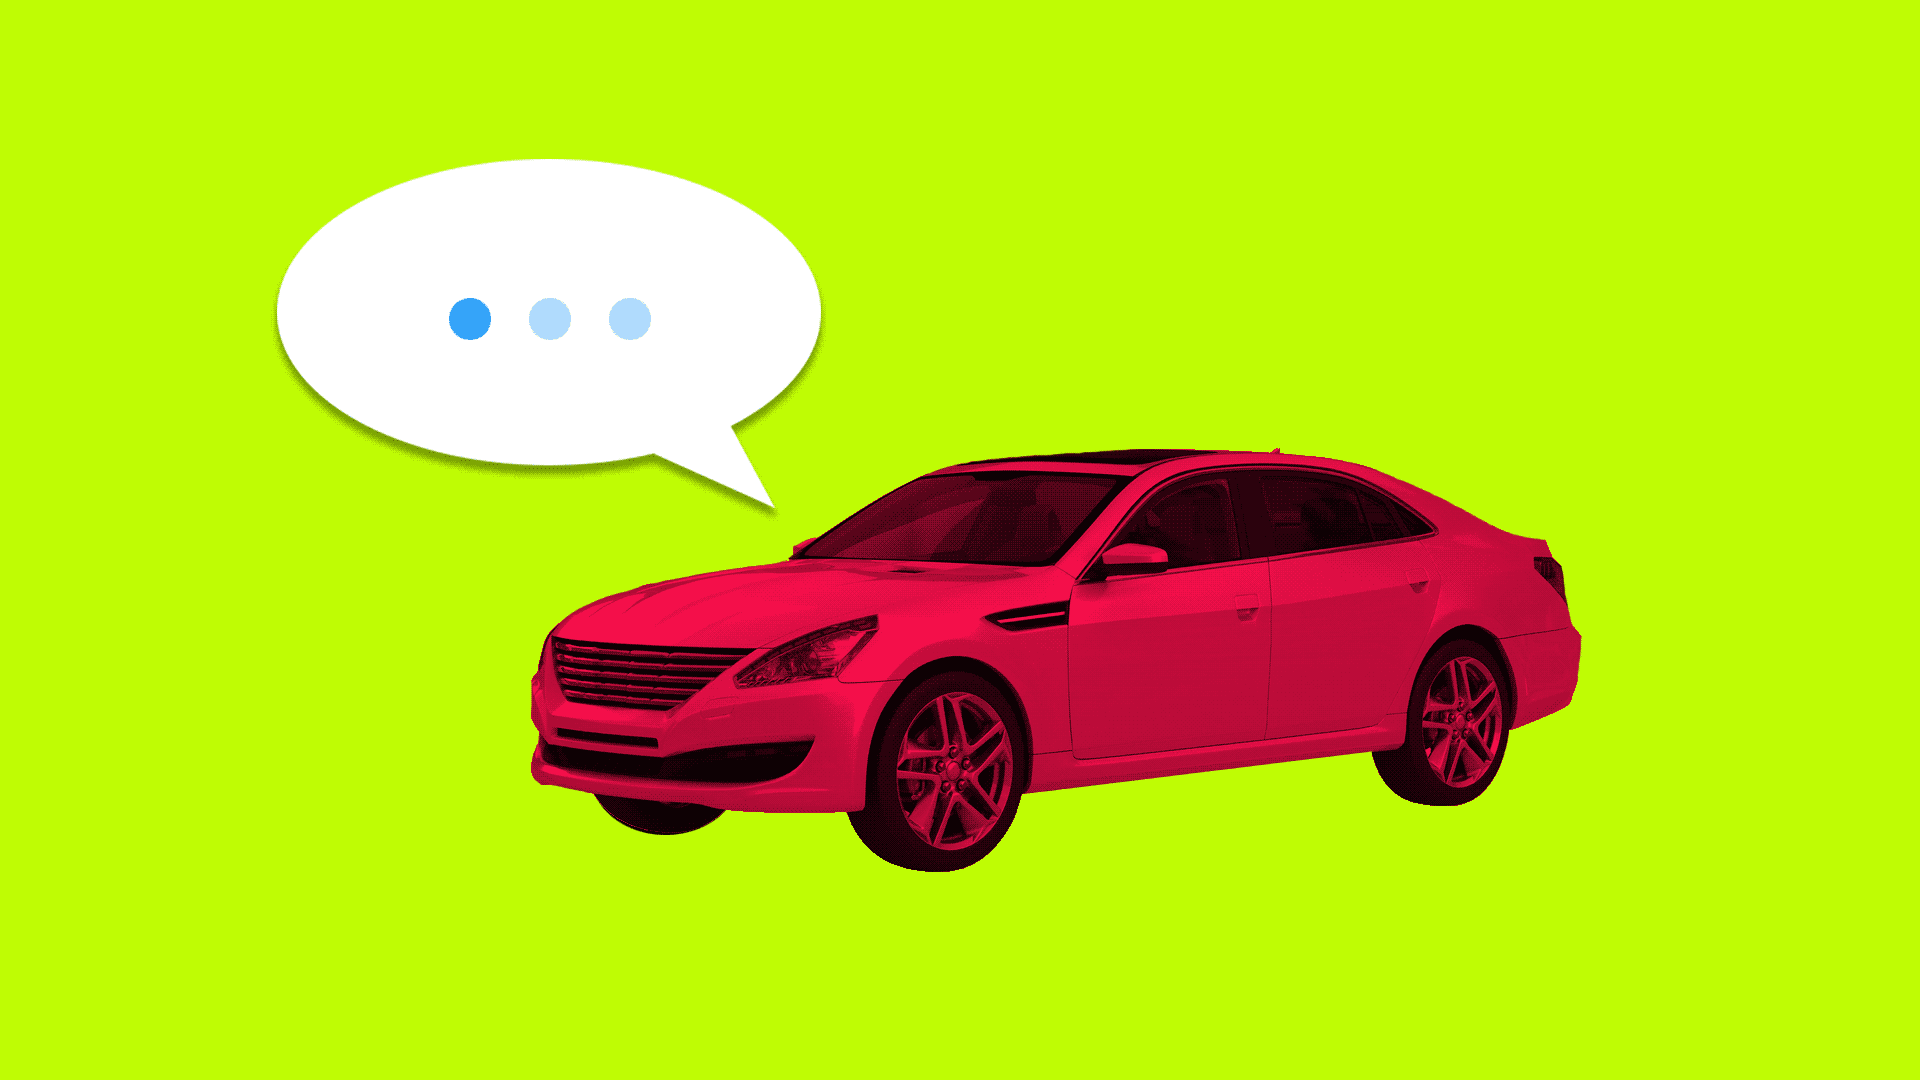 red car with a speech bubble displaying a flashing ellipsis (as in text messaging apps)